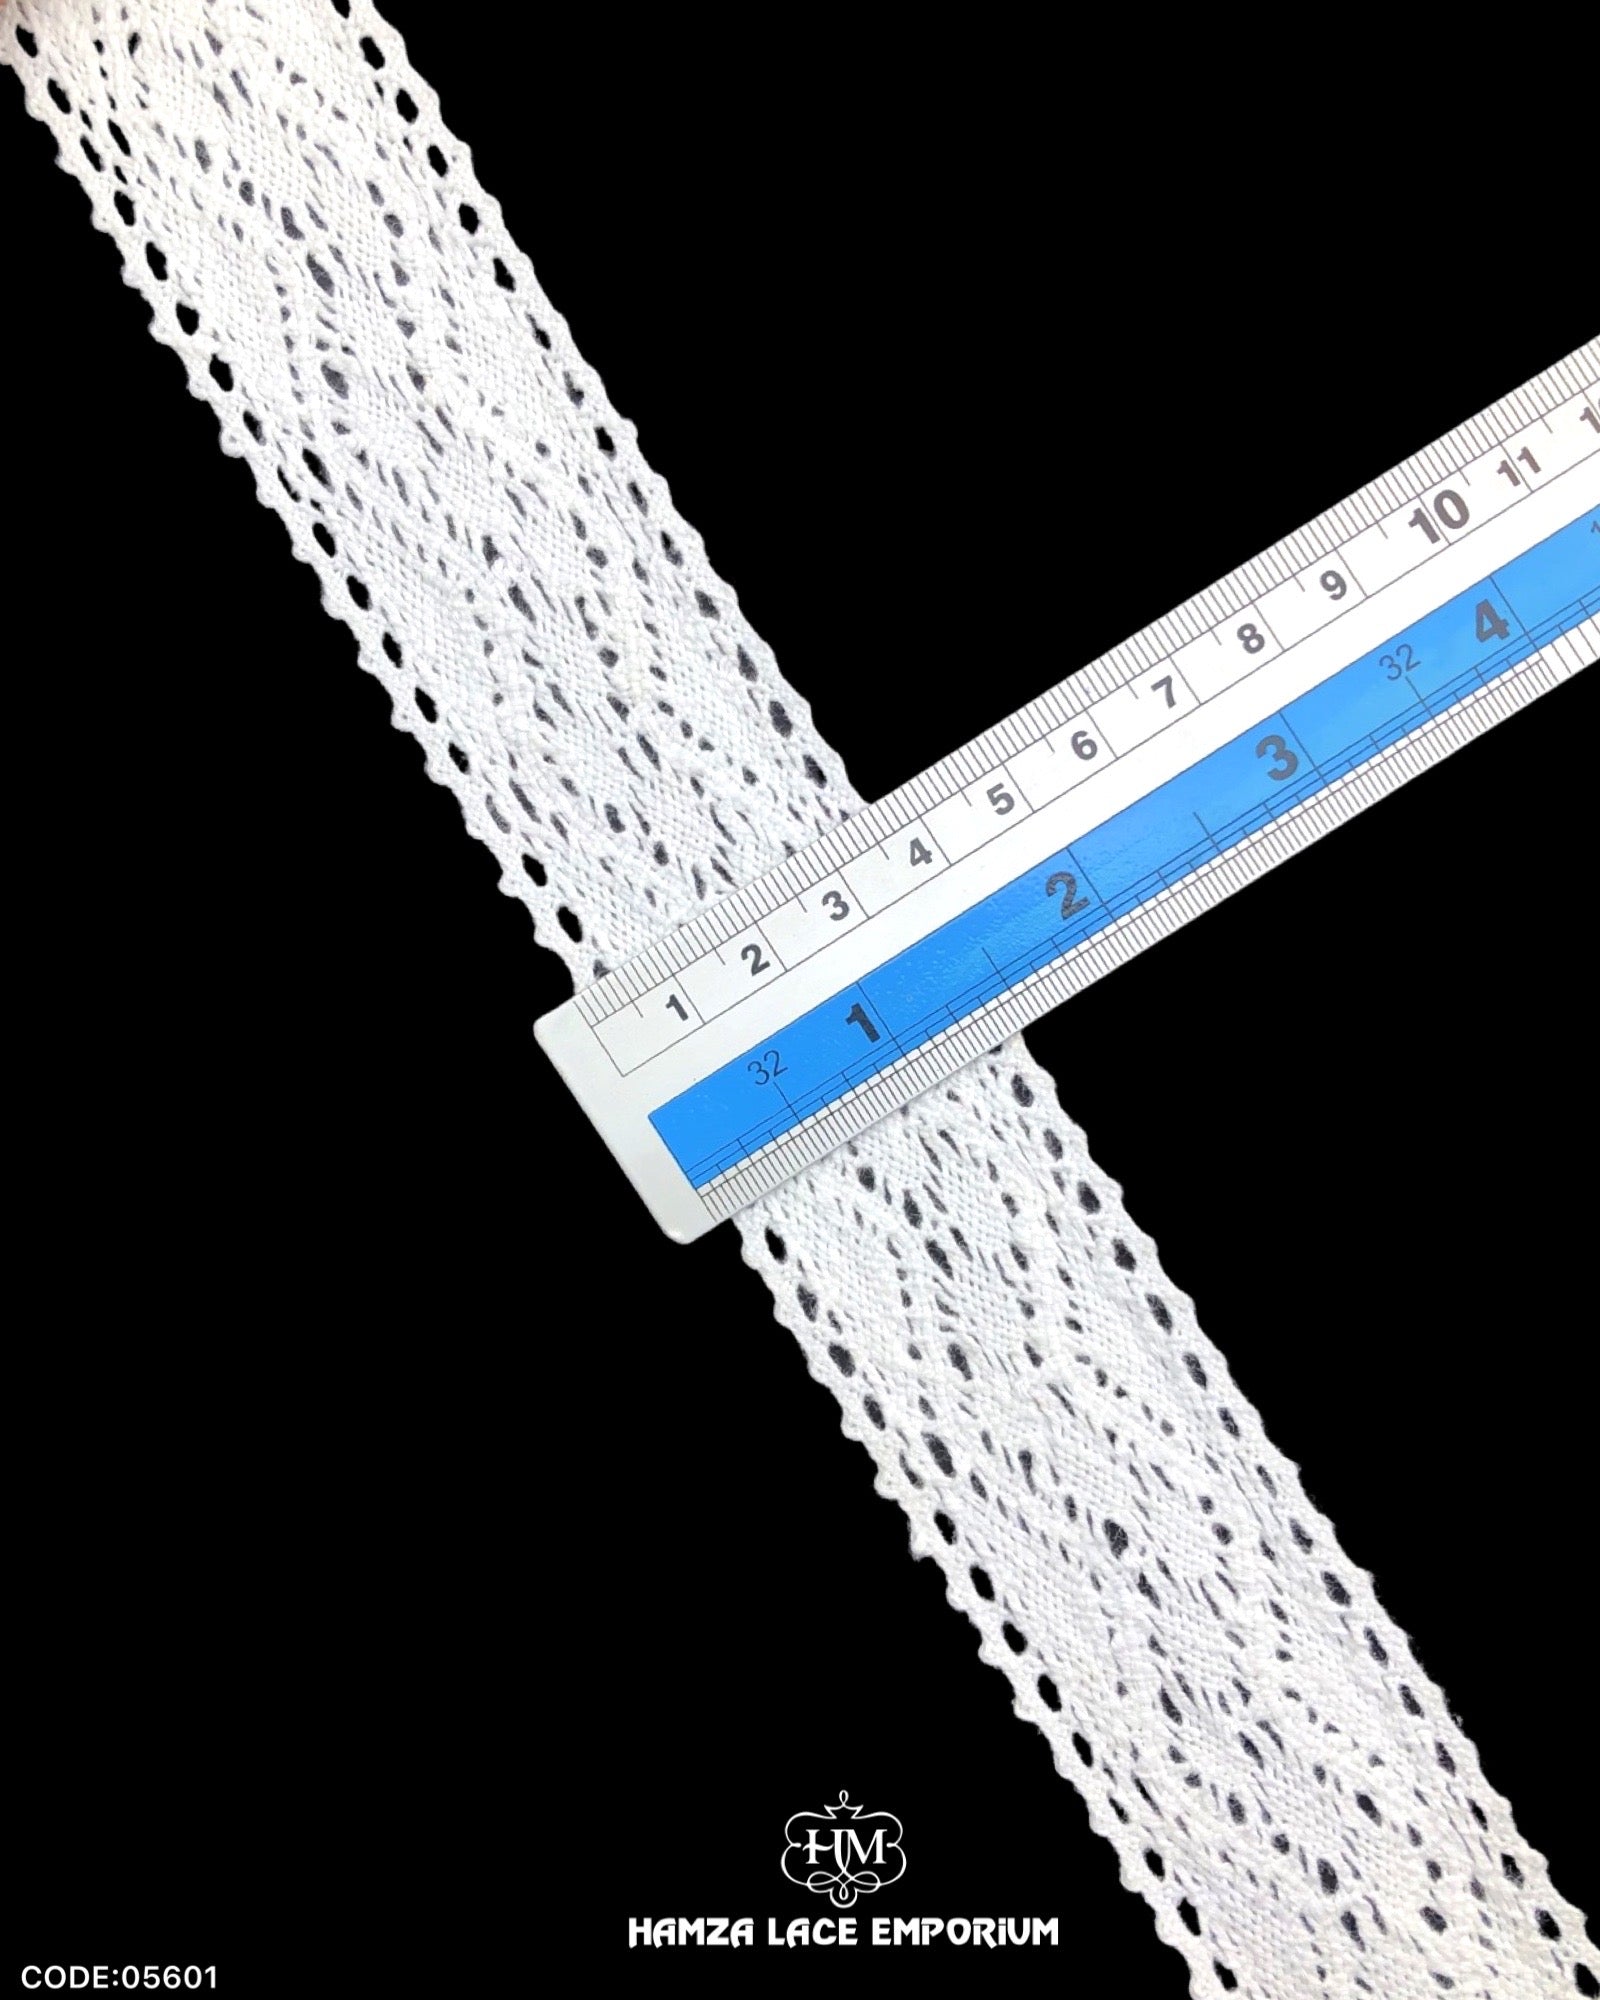 Size of the 'Center Filling Crochet Lace 05601' is displayed with the help of a ruler as '1.5' inches